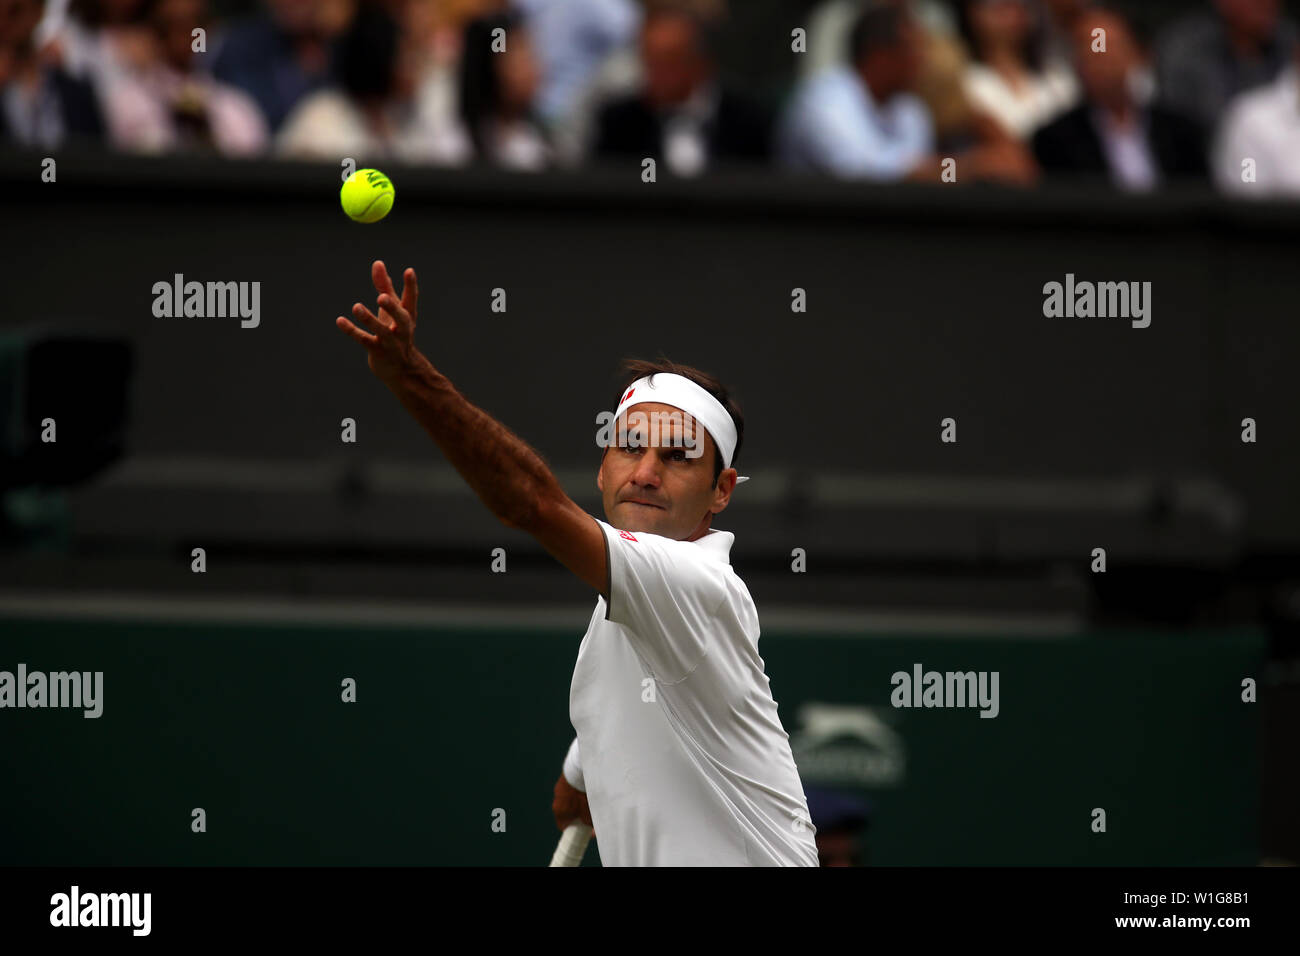 London, UK. 02nd July, 2019. Wimbledon, 2 July 2019 - Roger Federer serving during his first round match on Center Court at Wimbledon on Tuesday.  Credit: Adam Stoltman/Alamy Live News Stock Photo